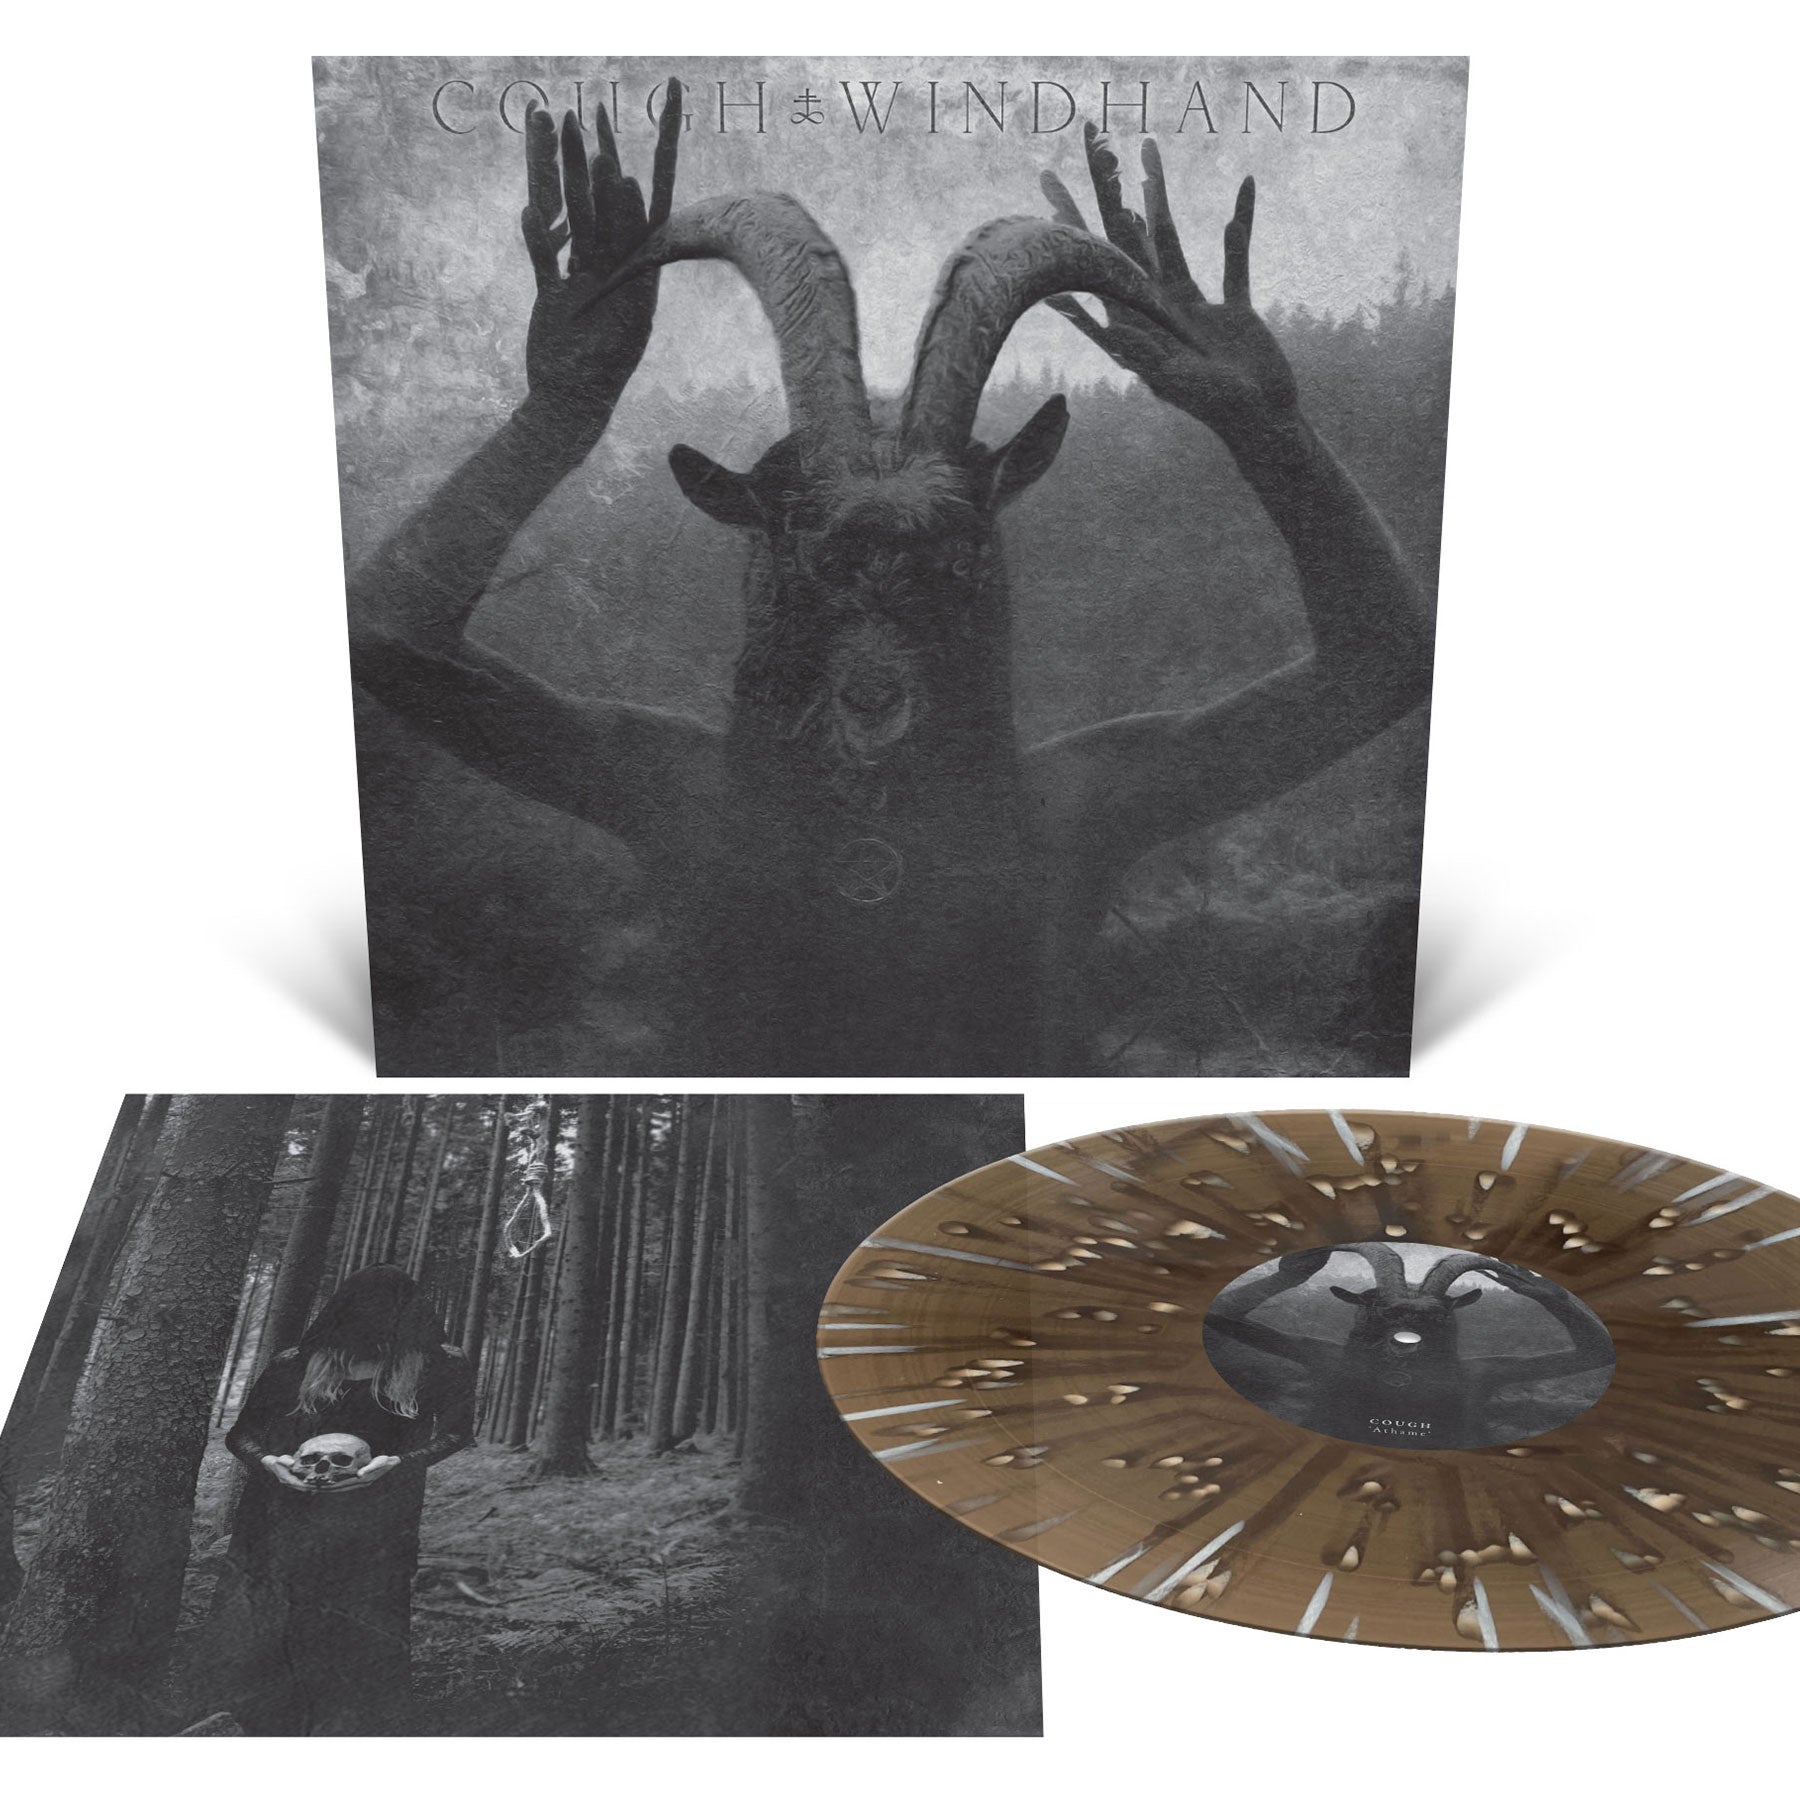 Cough / Windhand "Reflection of the Negative" 12"